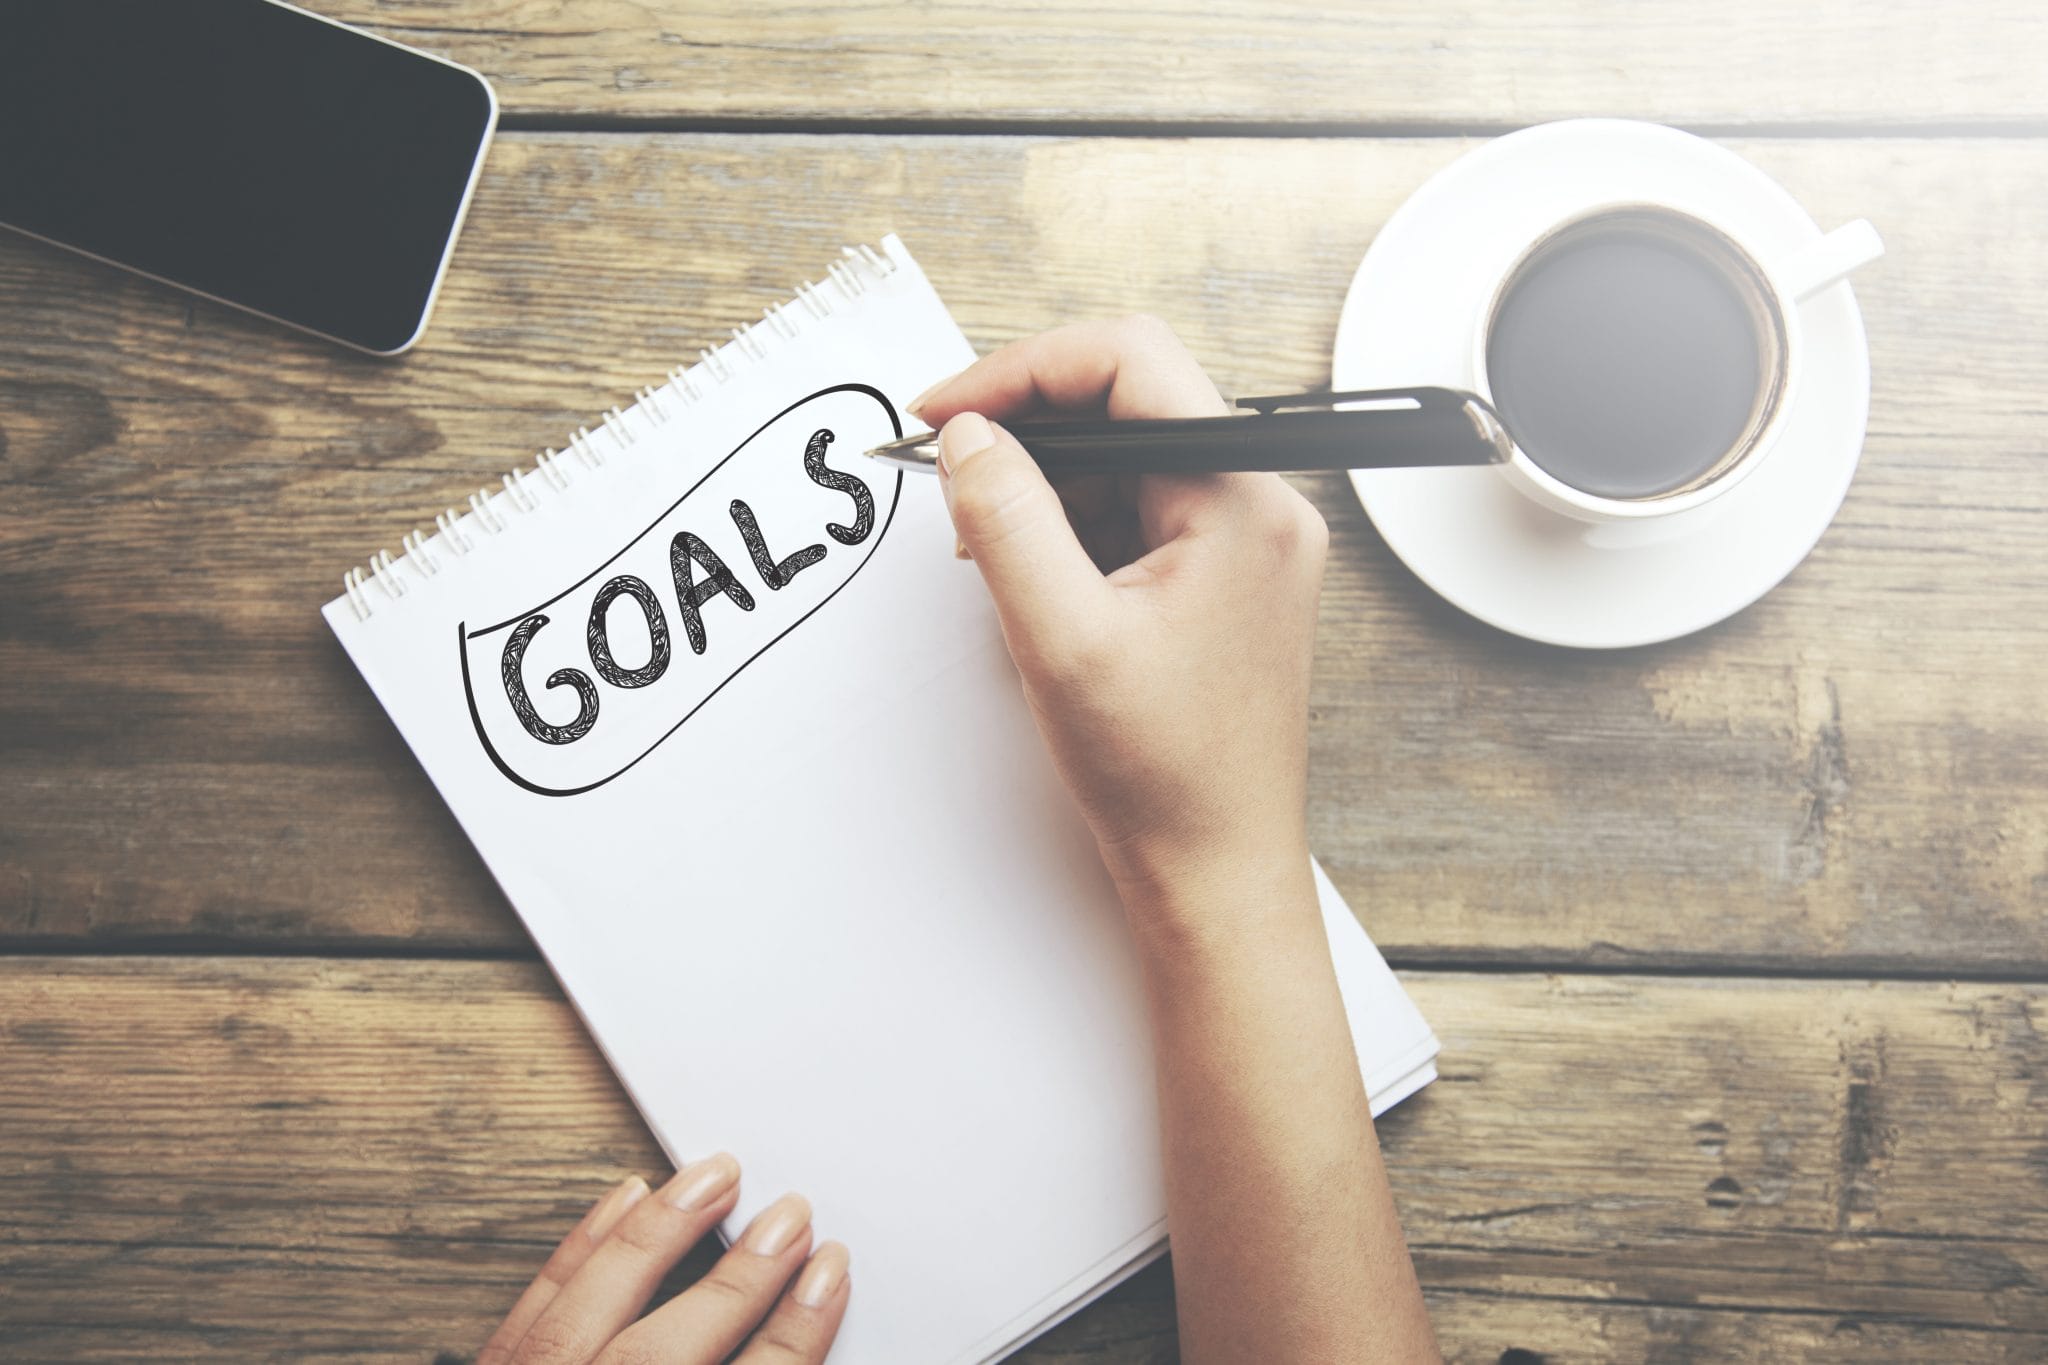 Write down your goals